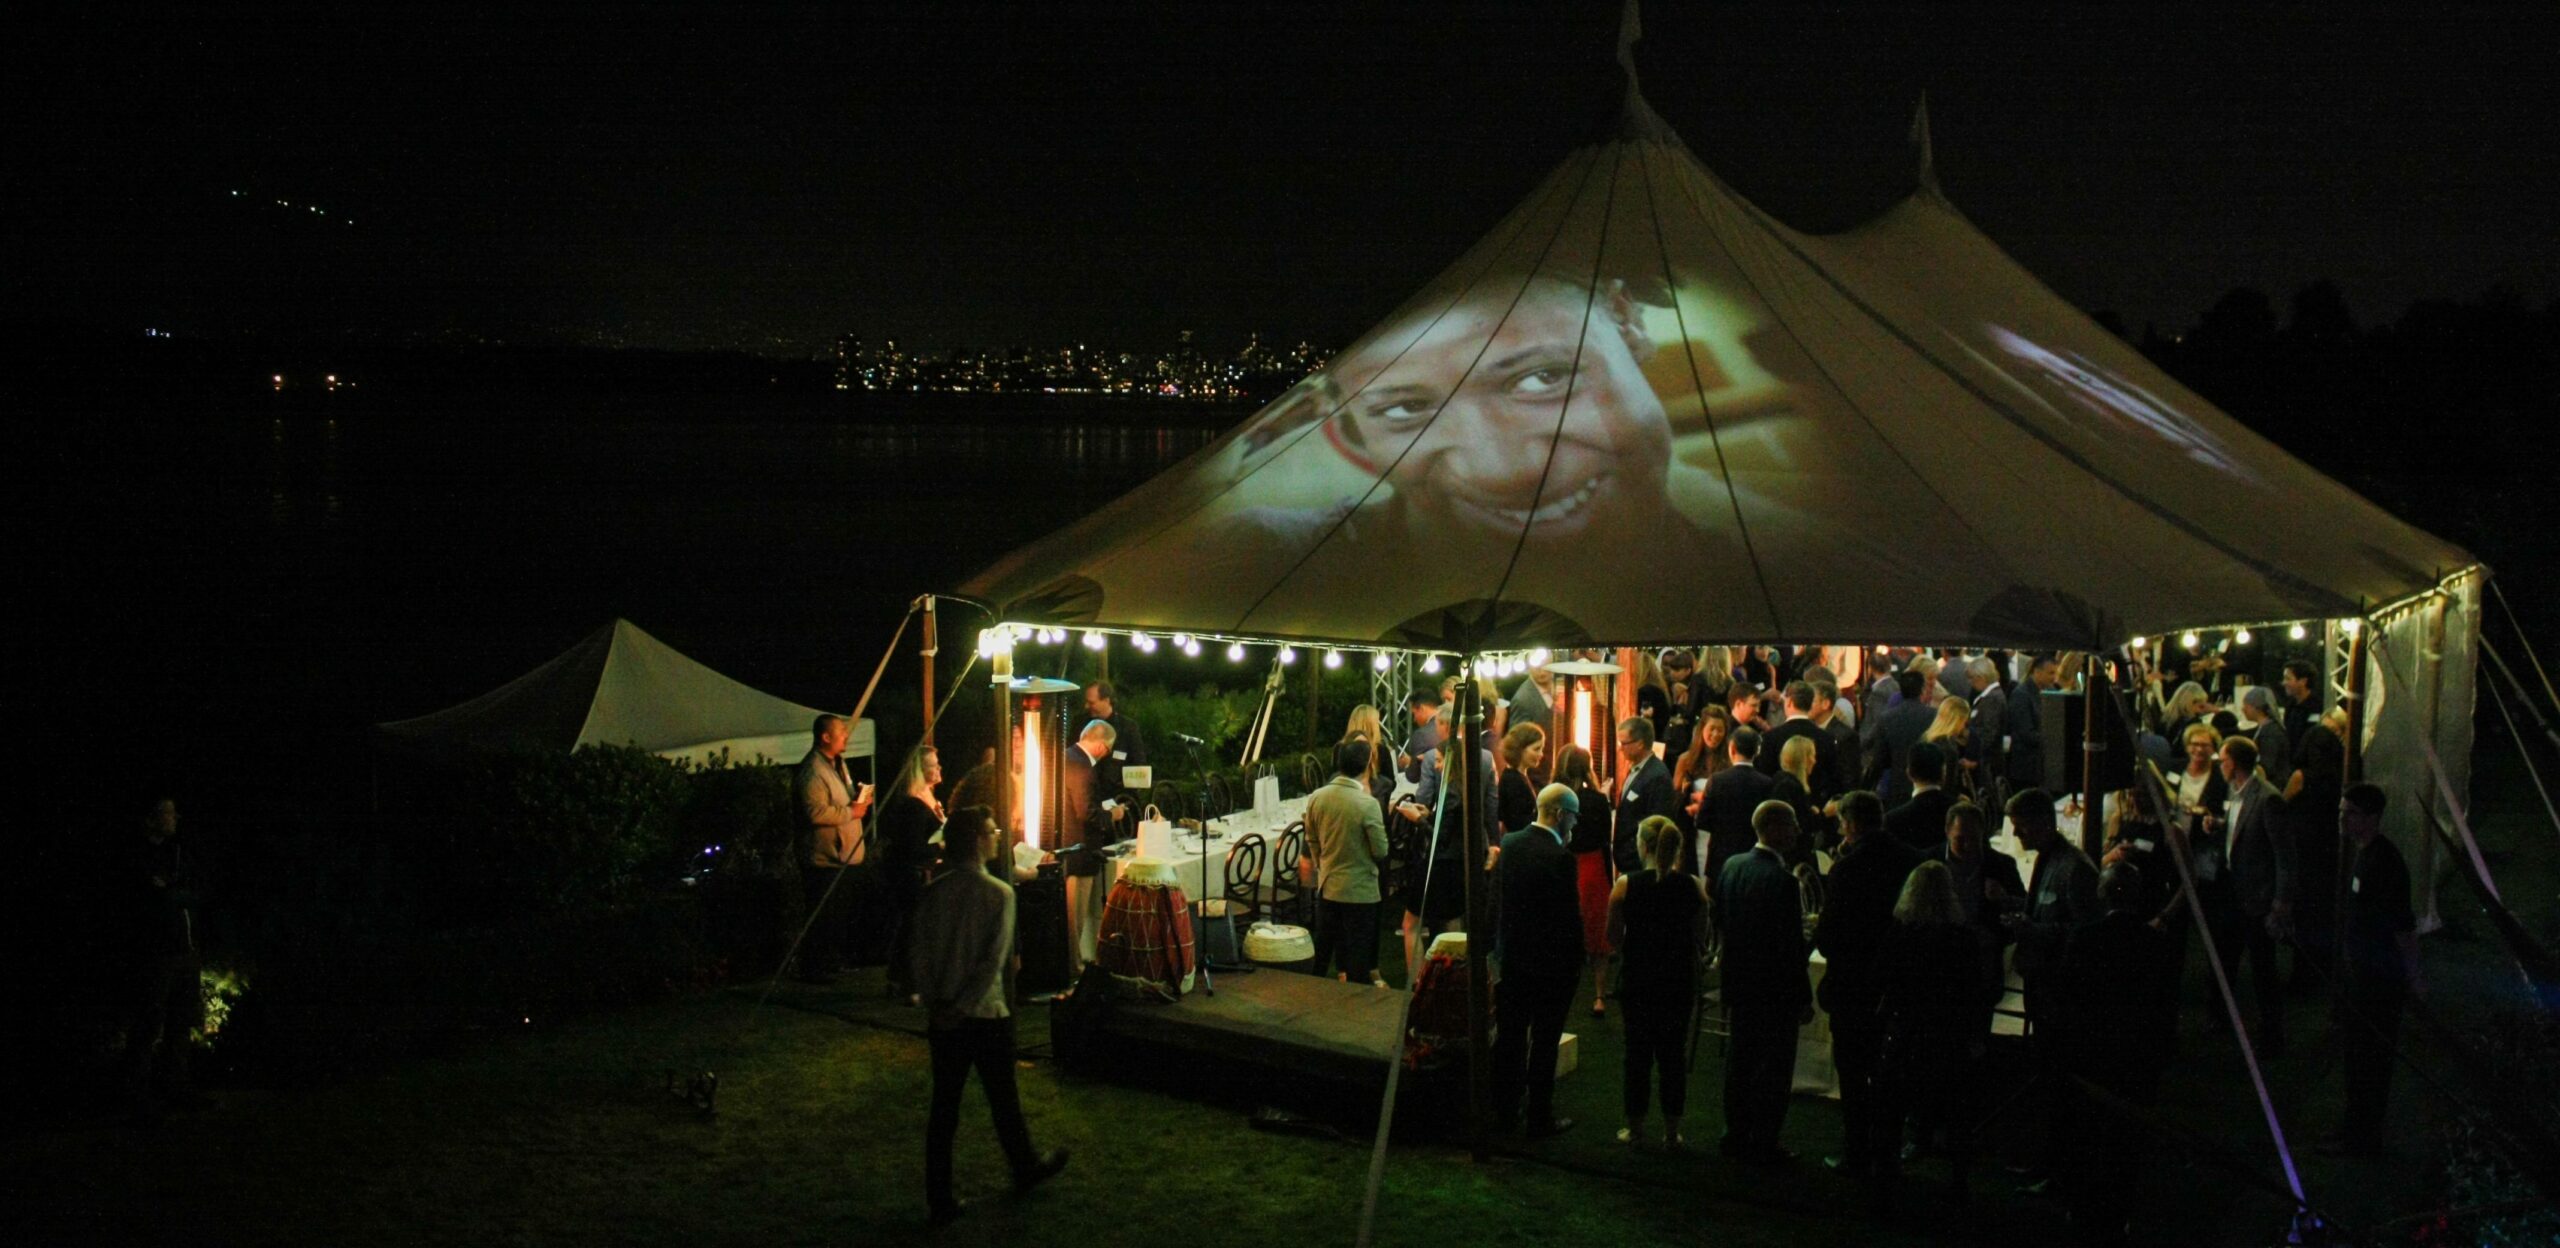 Dinner was held an illuminated tent filled the sounds and sights of Ethiopian schools.